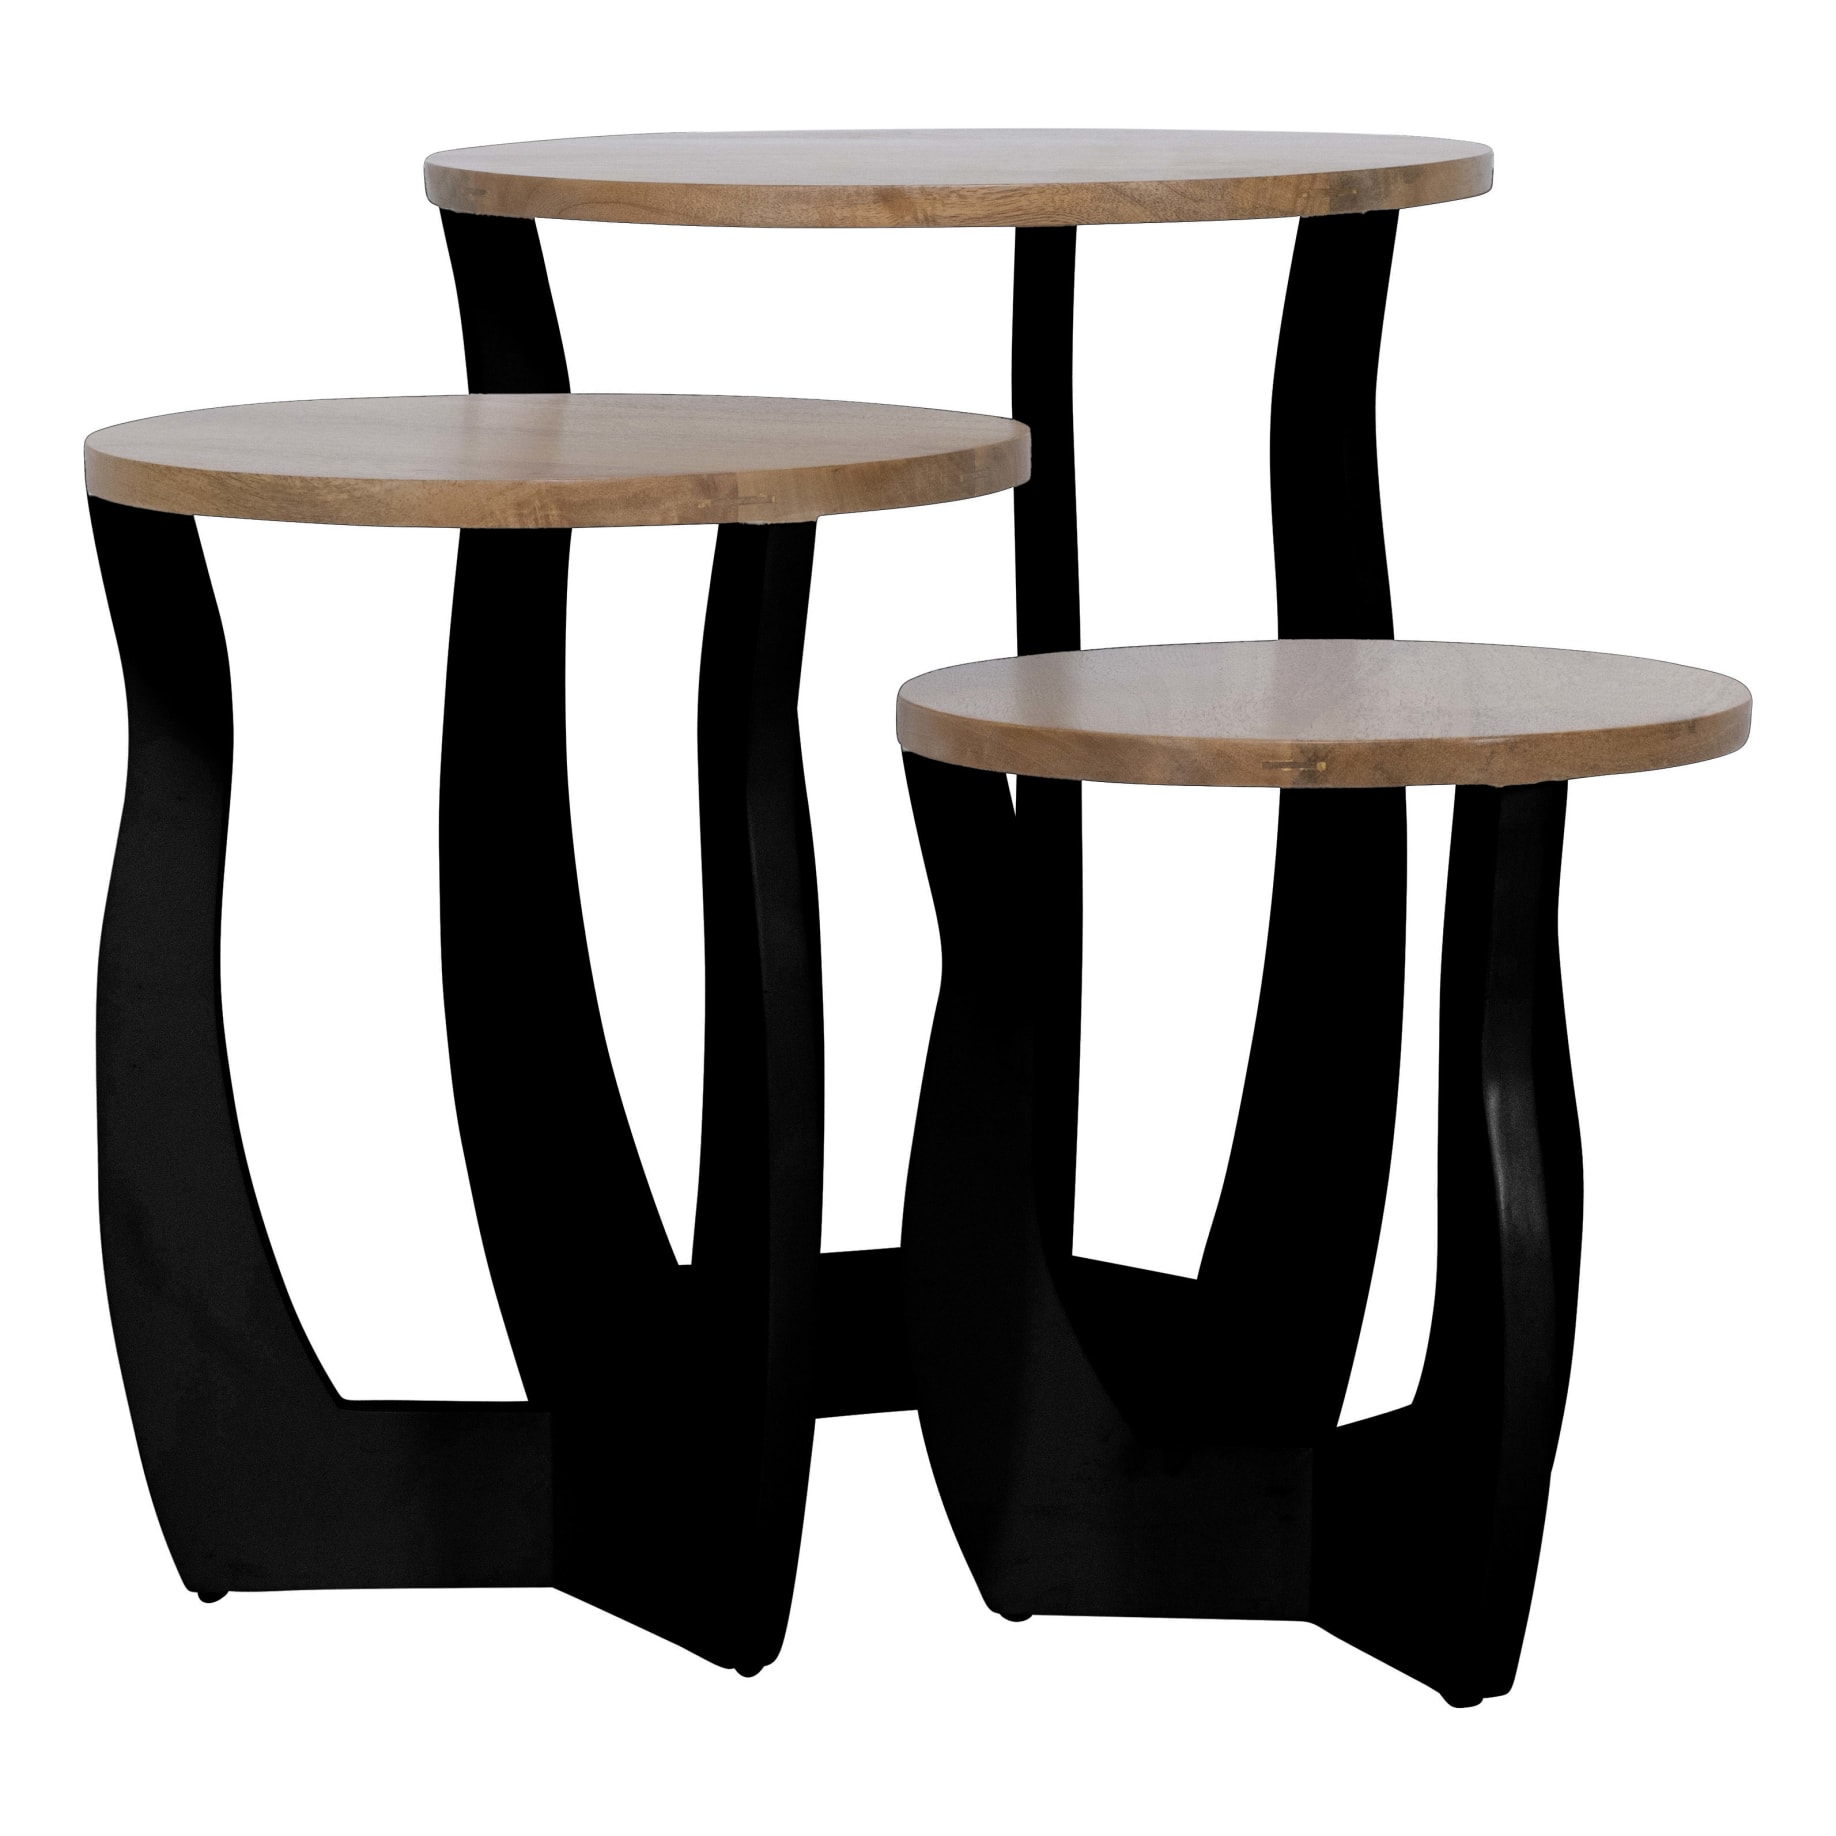 Coco Nest of 3 Tables in Mangowood / Black Leg